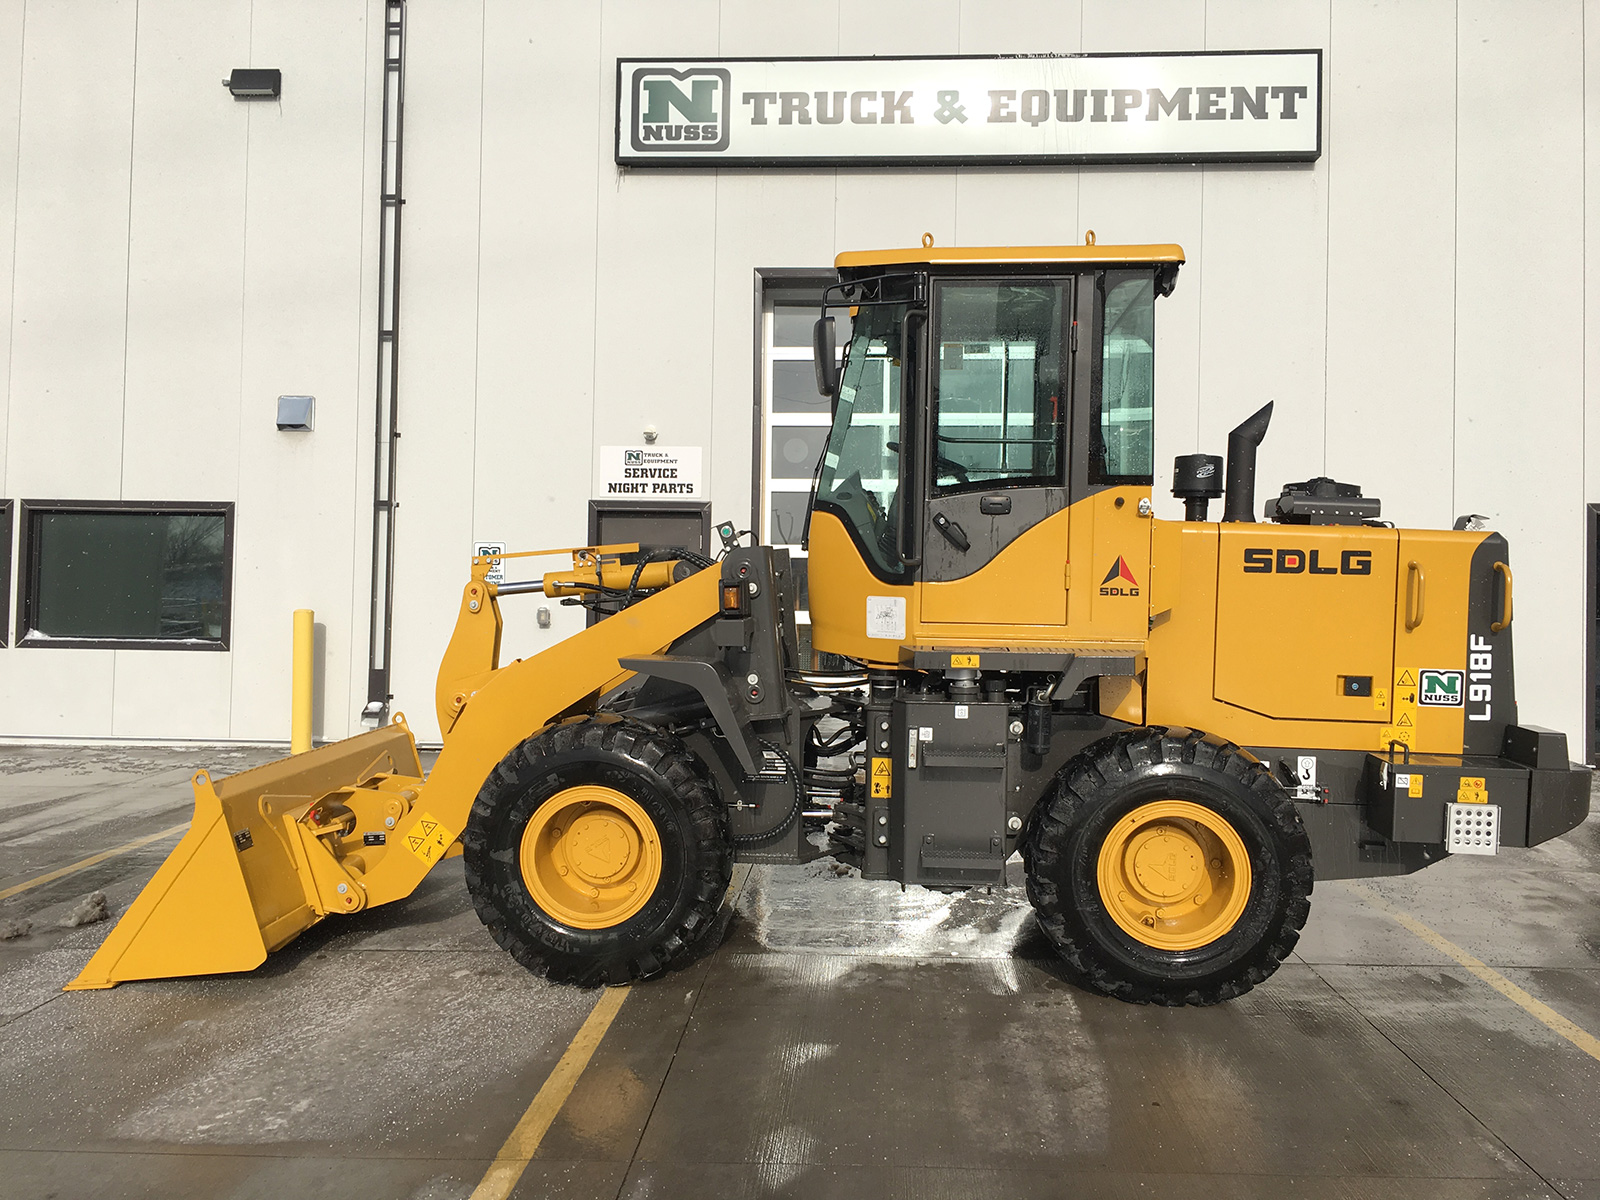 Nuss Truck & Equipment to showcase SDLG L918F compact wheel loader at Northern Green 2018